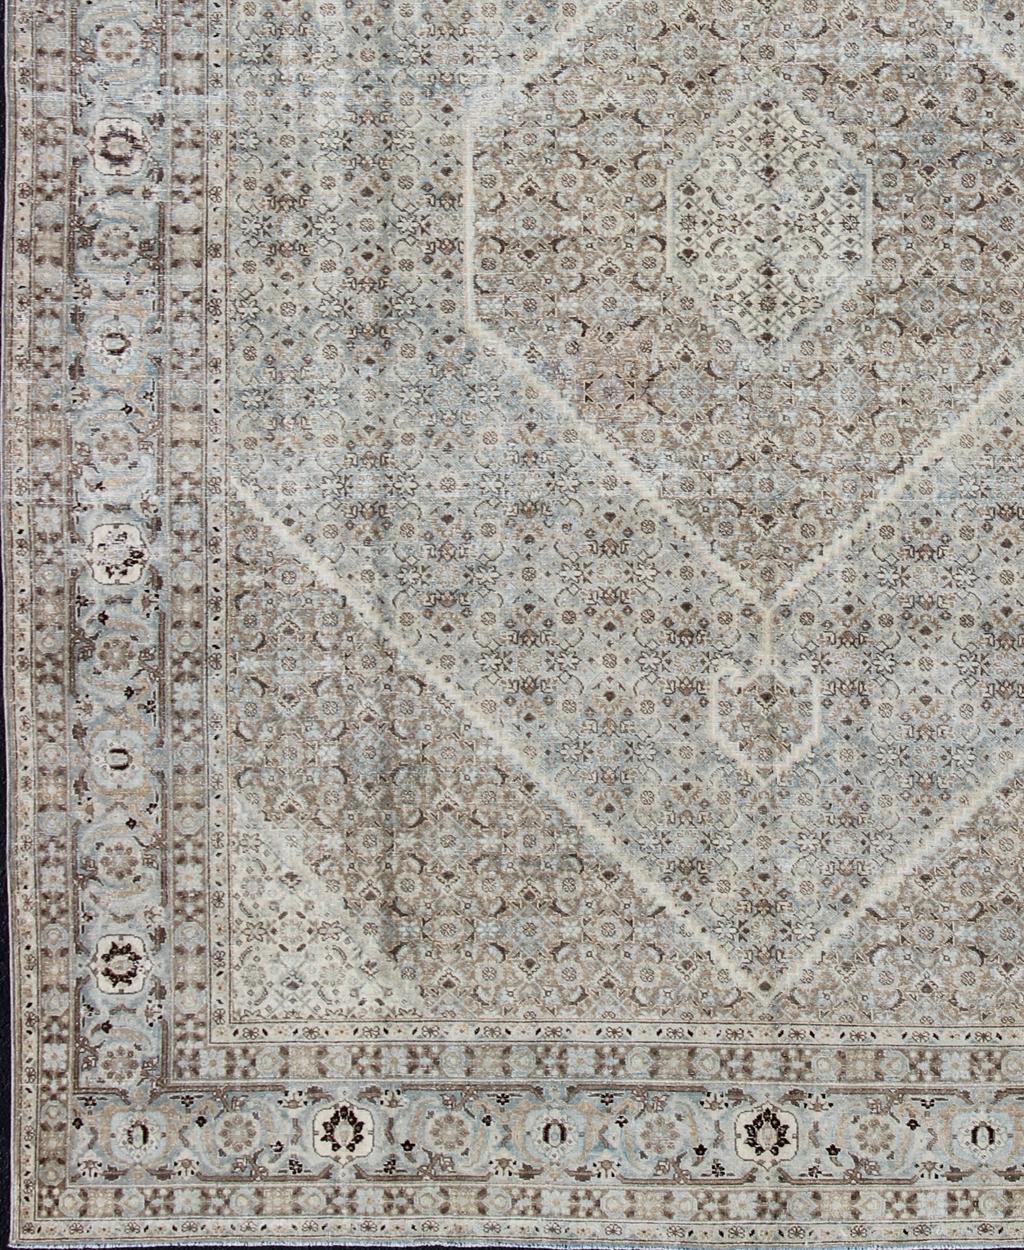 Gray, light blue, taupe, tan and brown geometric Persian Tabriz rug, rug SUS-1908-352, country of origin / type: Iran / Tabriz, circa 1920

This antique Tabriz carpet from 1920s Persia features a field filled with small-scale geometric motifs